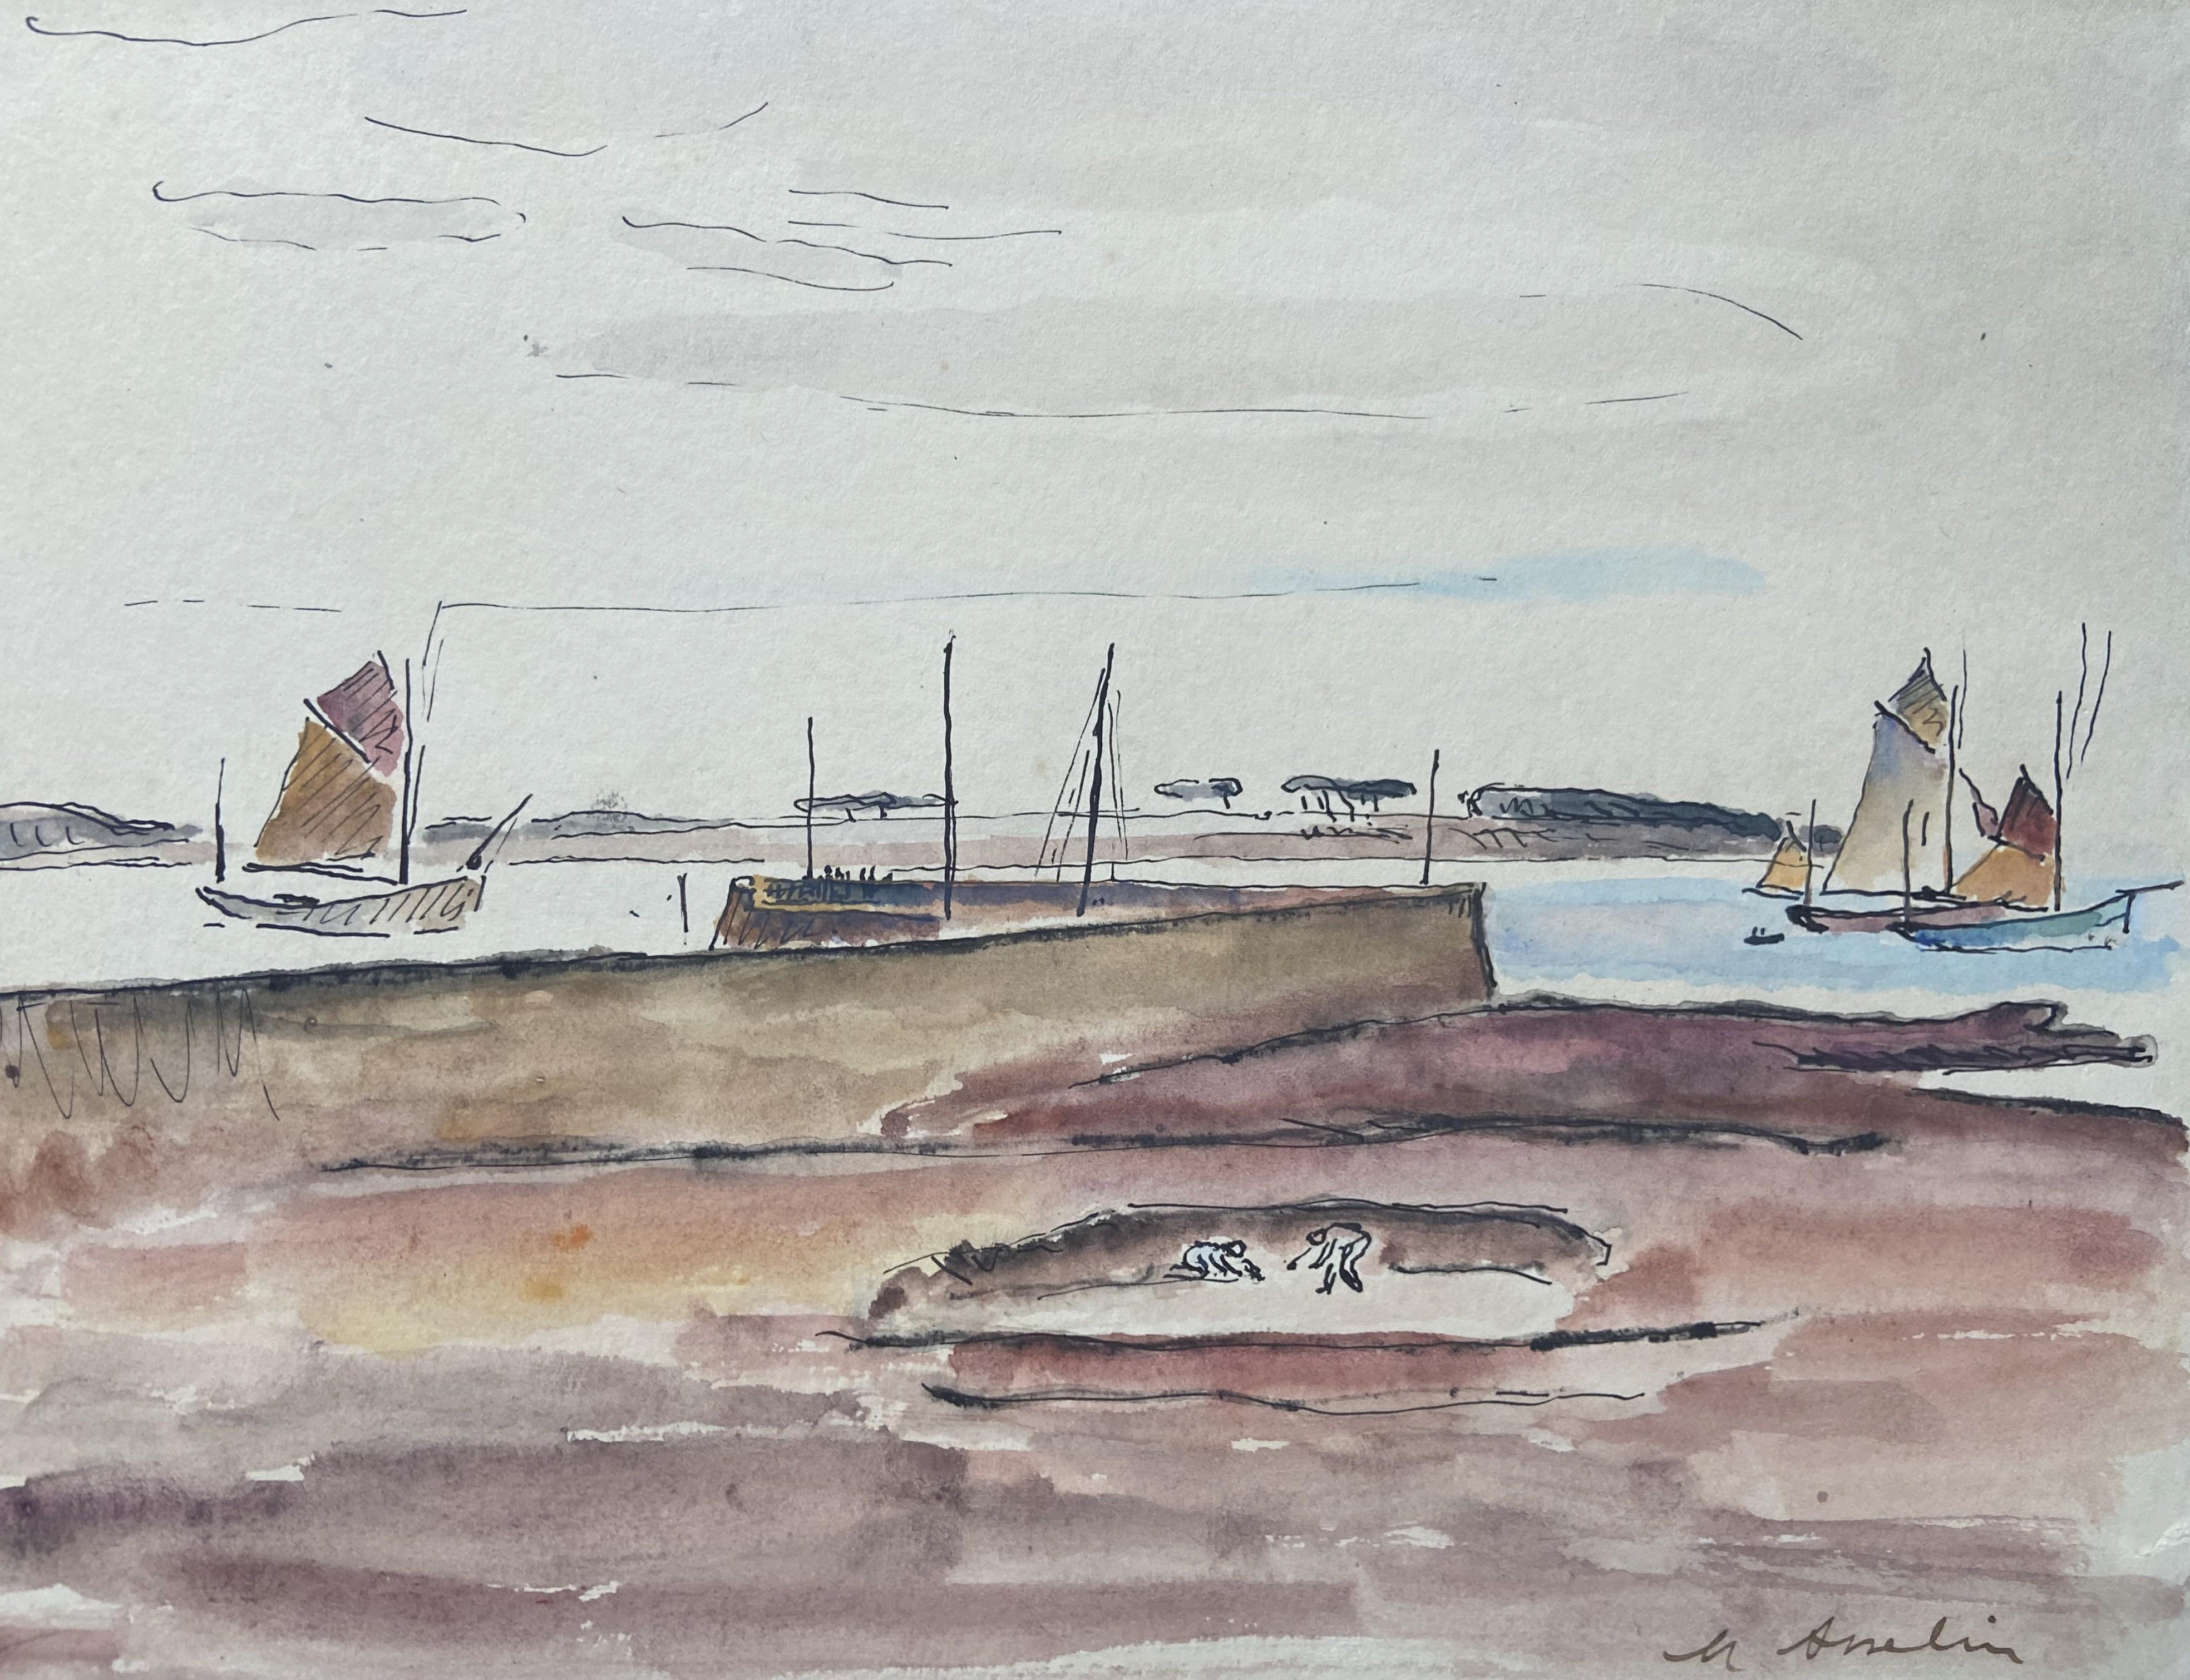 Maurice Asselin (1882-1947) 
A Seascape, Brittany,  
signed lower right
watercolor on paper
19.7 x 25.2 cm
Framed  : 35 x 40.5 cm

Maurice Asselin was particularly attached to Brittany, which he discovered for the first time in 1905, at the age of